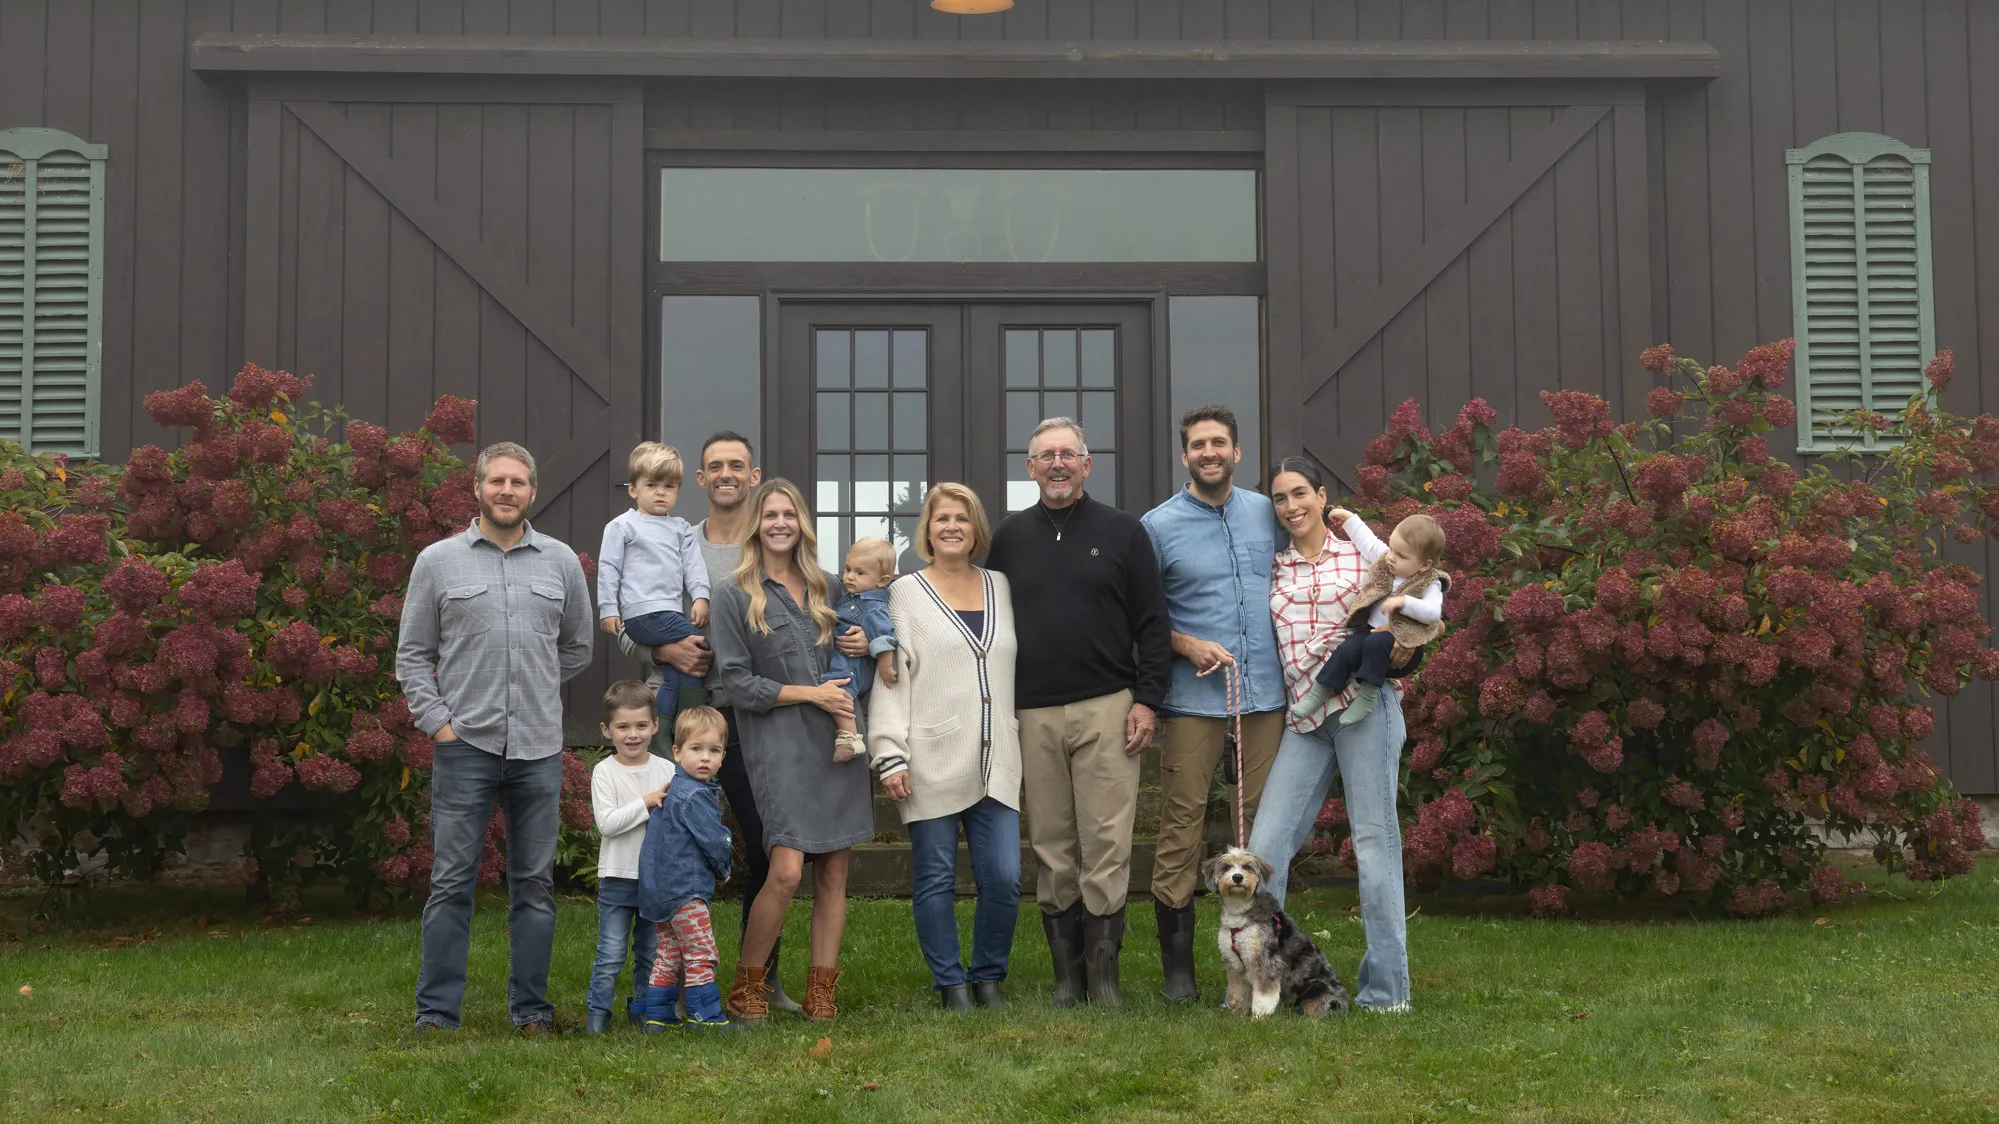 Doug and Beth Morgan stand in the middle as their family poses in front of a dark-stained barn. All the adults seem to be genuinely smiling. There are three other men, two other women, and four kids ranging from maybe 3 or 4 years old to 8 months. (They seem more puzzled  and distracted than posing!) And a shaggy, smaller sized dog on a leash. 